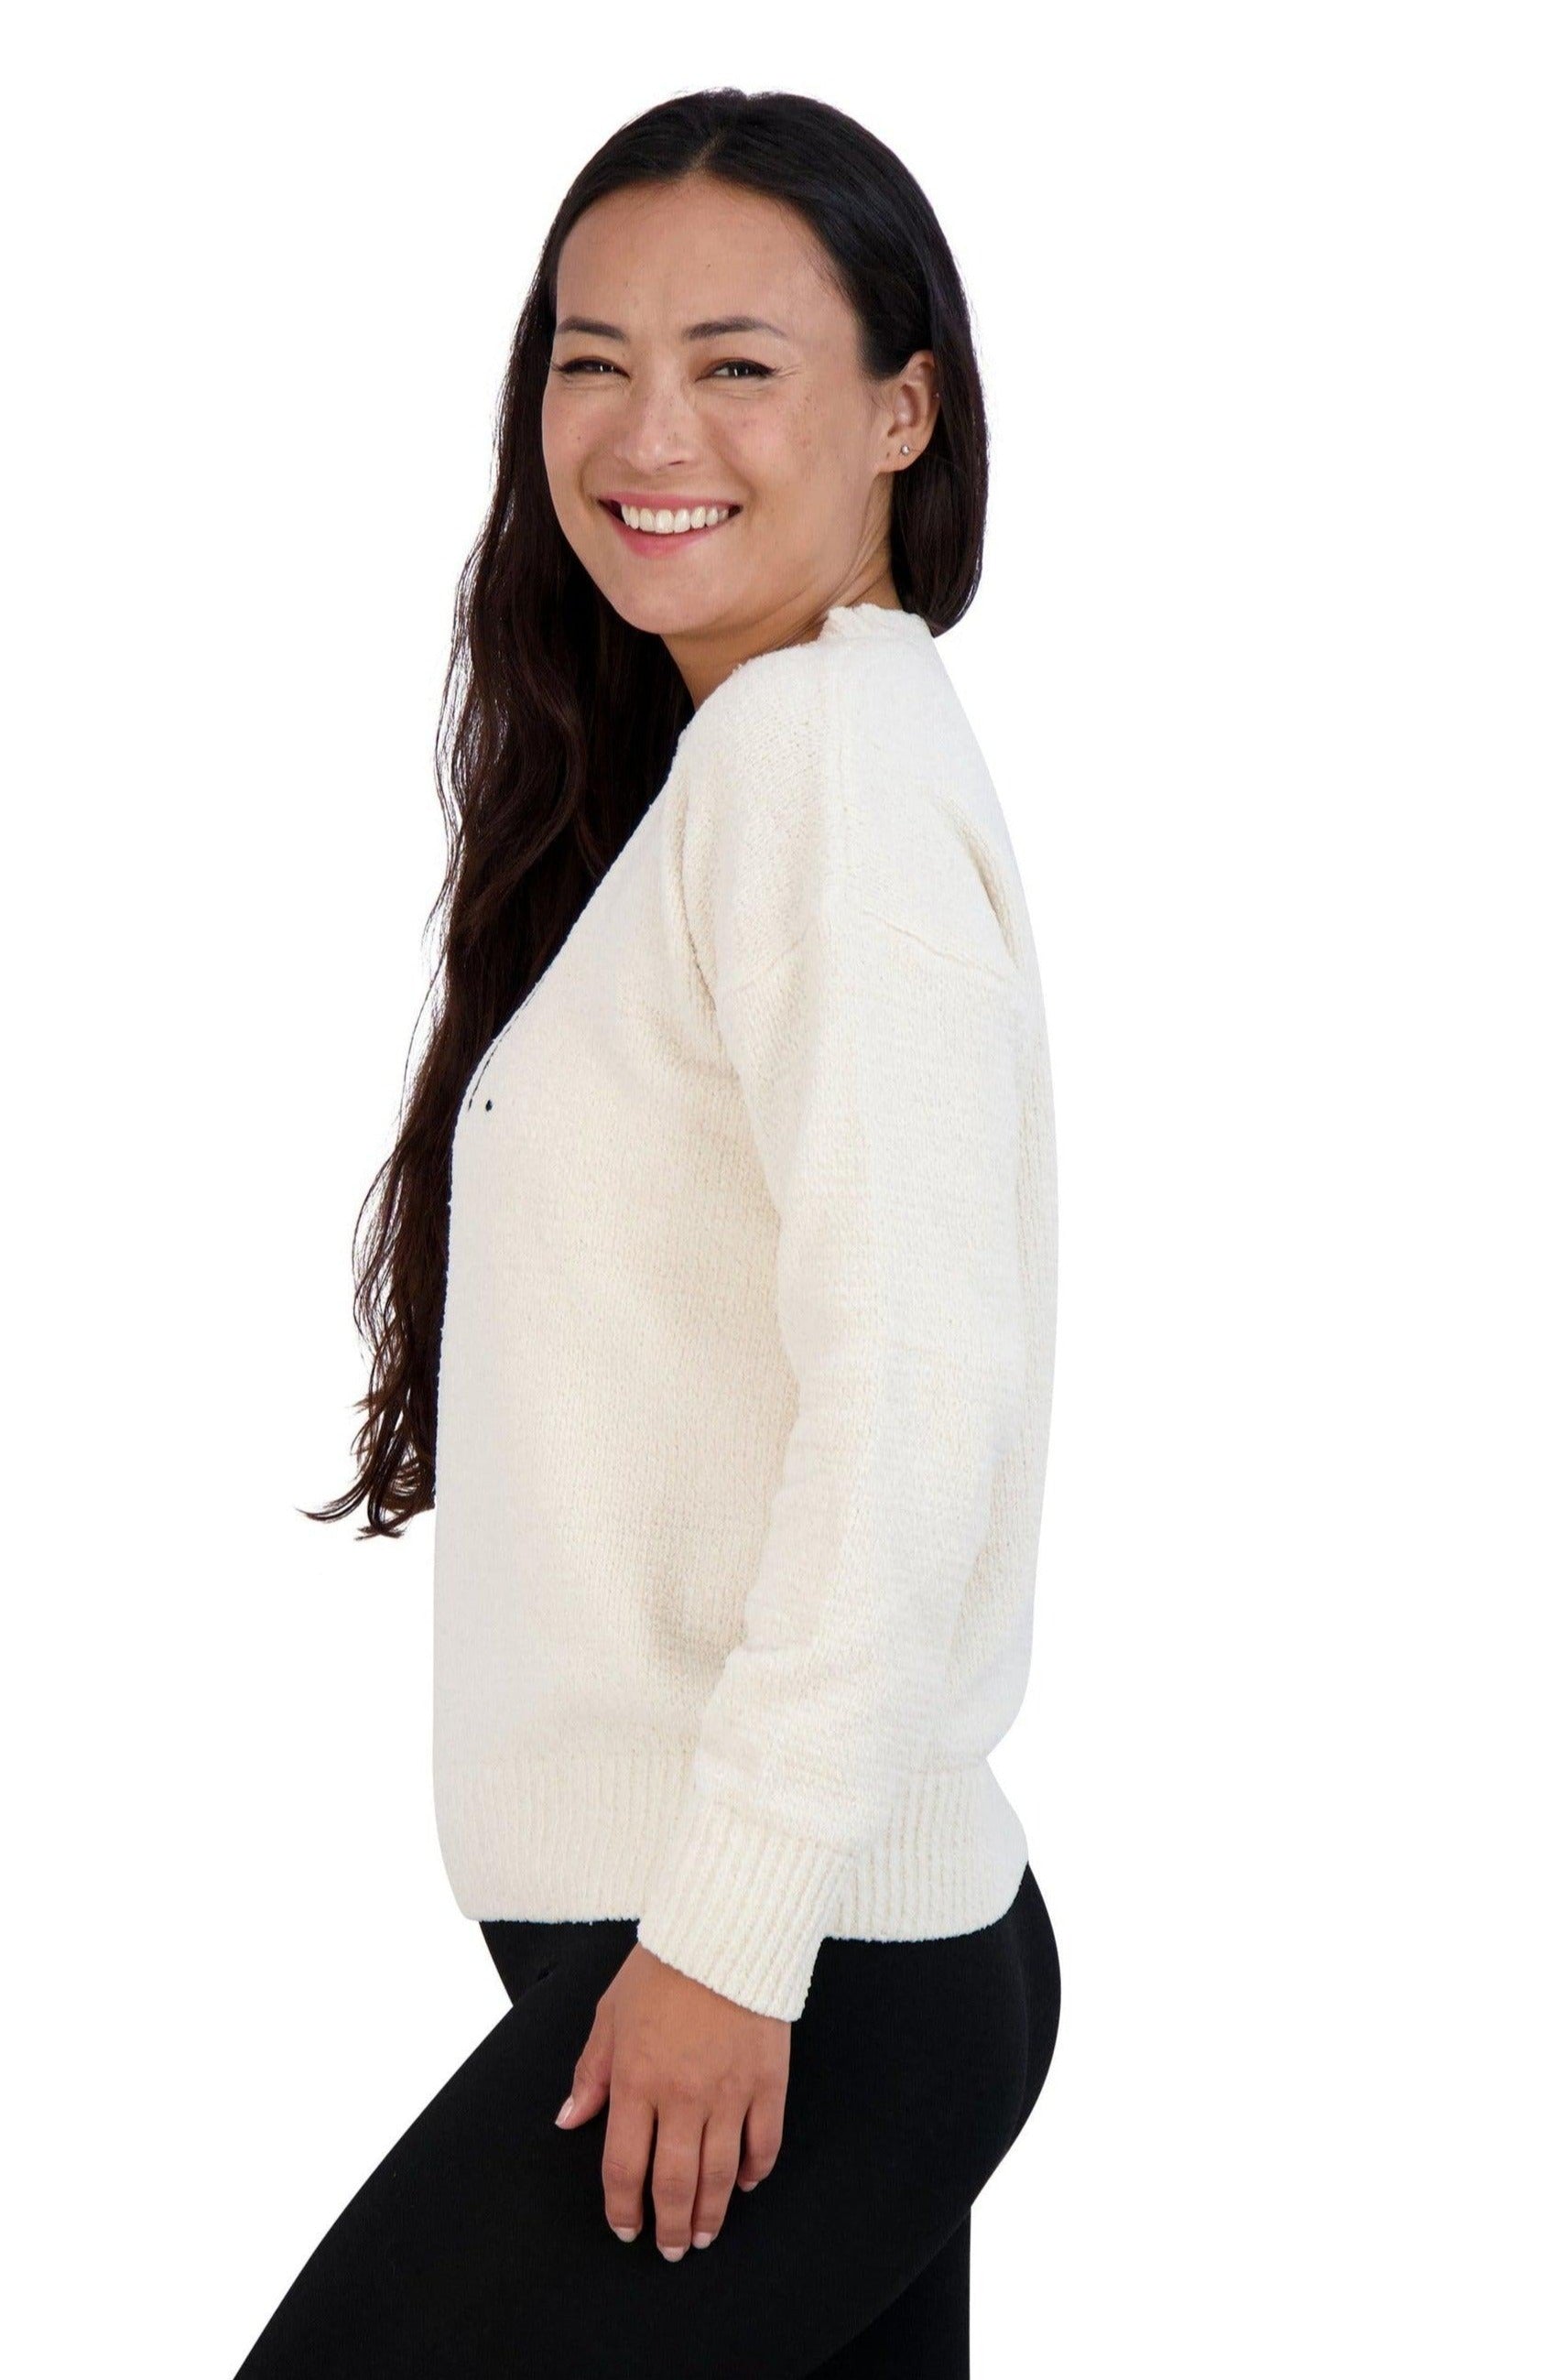 Women's Embroidered COZY Chenille Sweater – Rae Dunn Wear